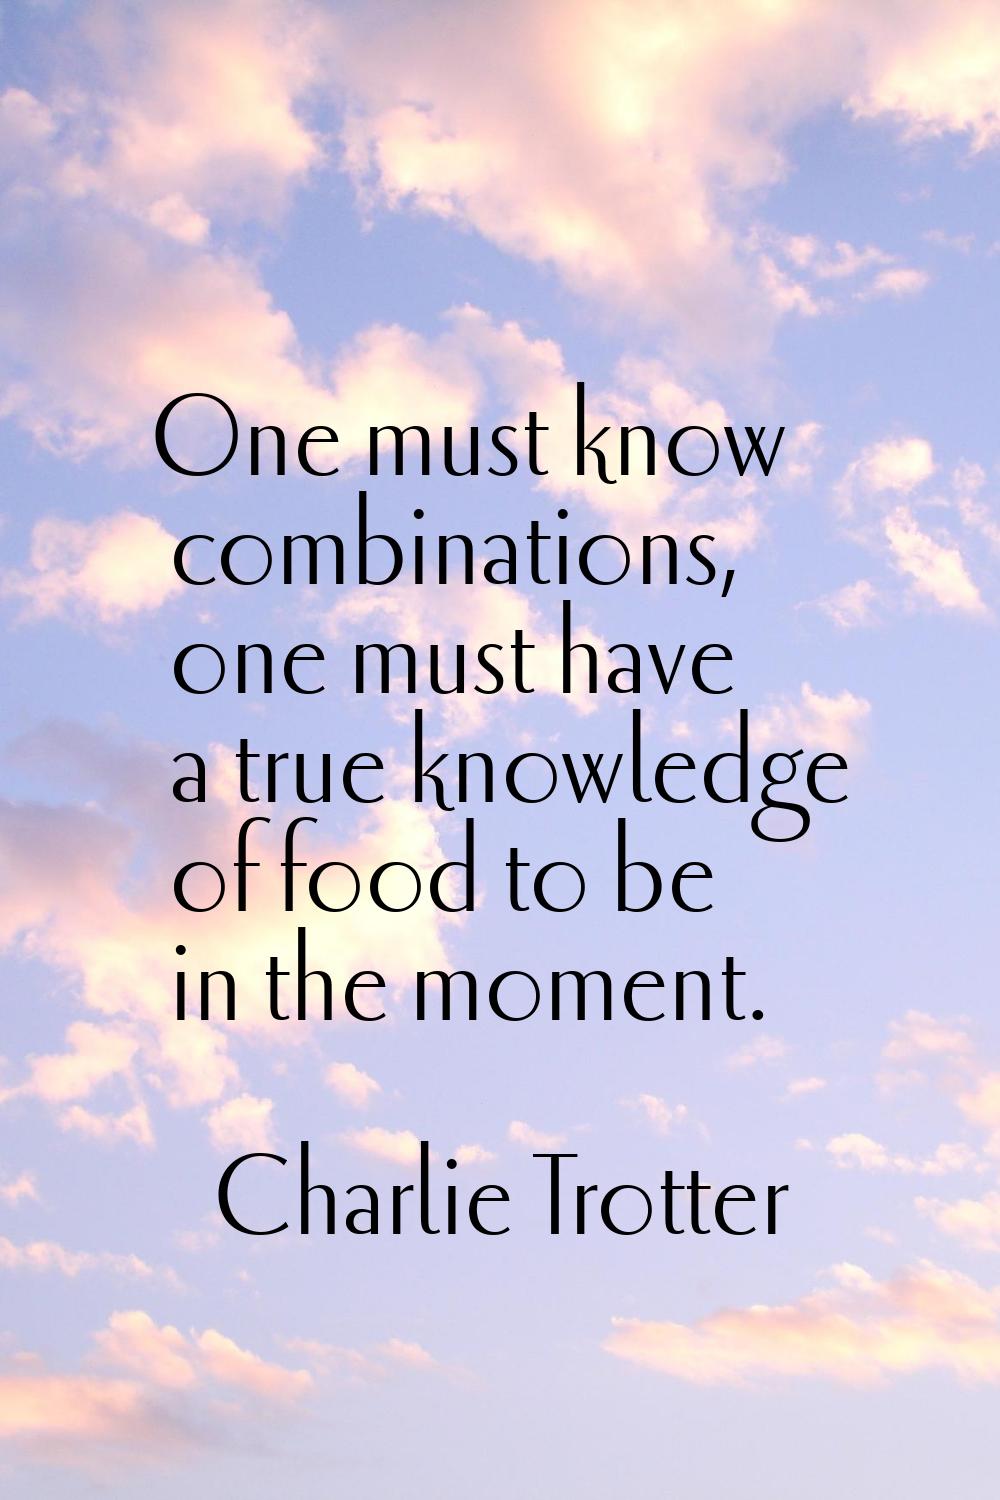 One must know combinations, one must have a true knowledge of food to be in the moment.